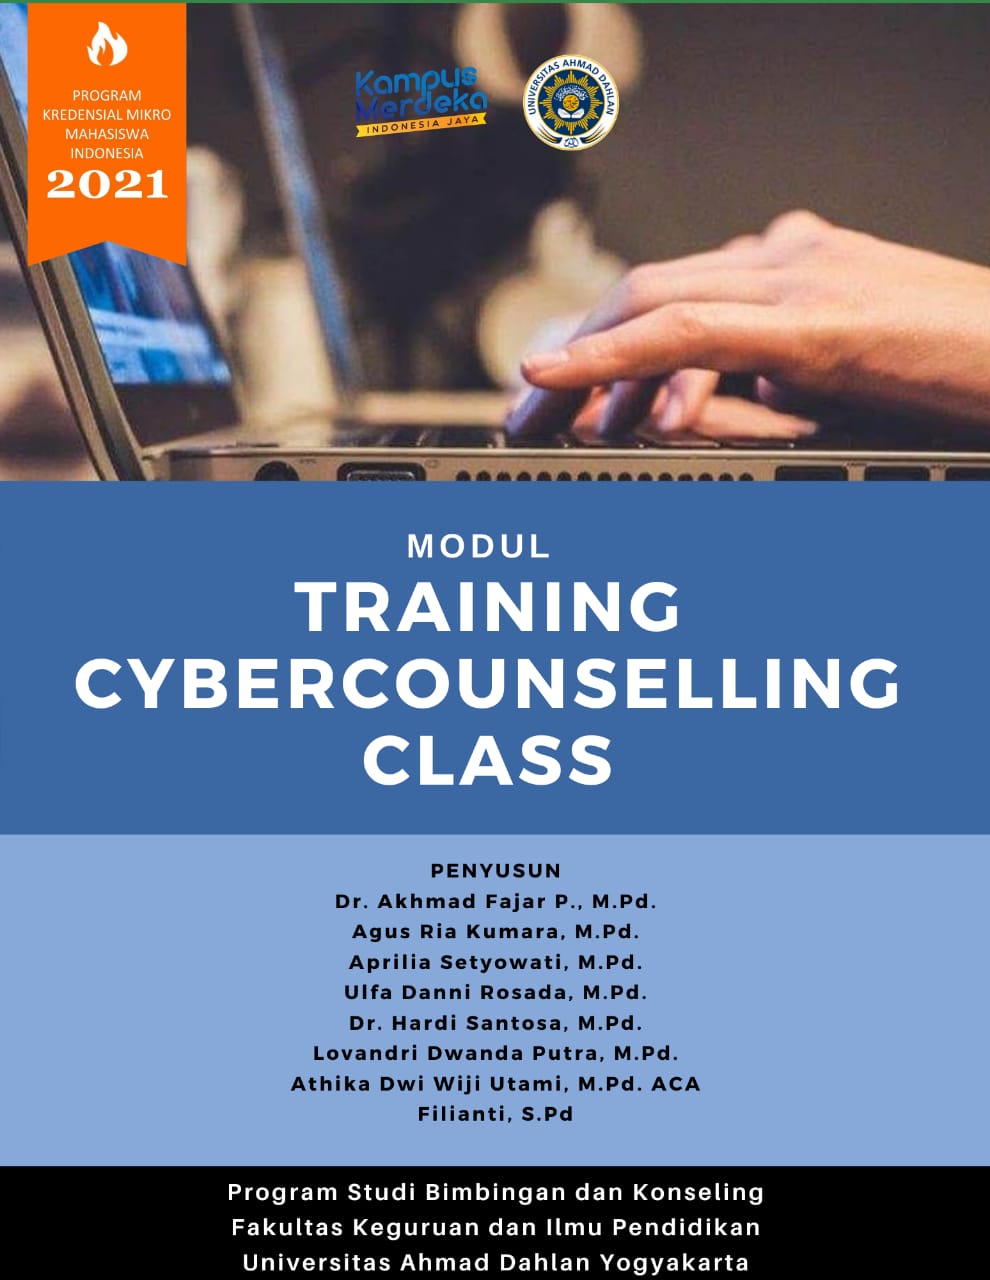 Cyber Counseling Class